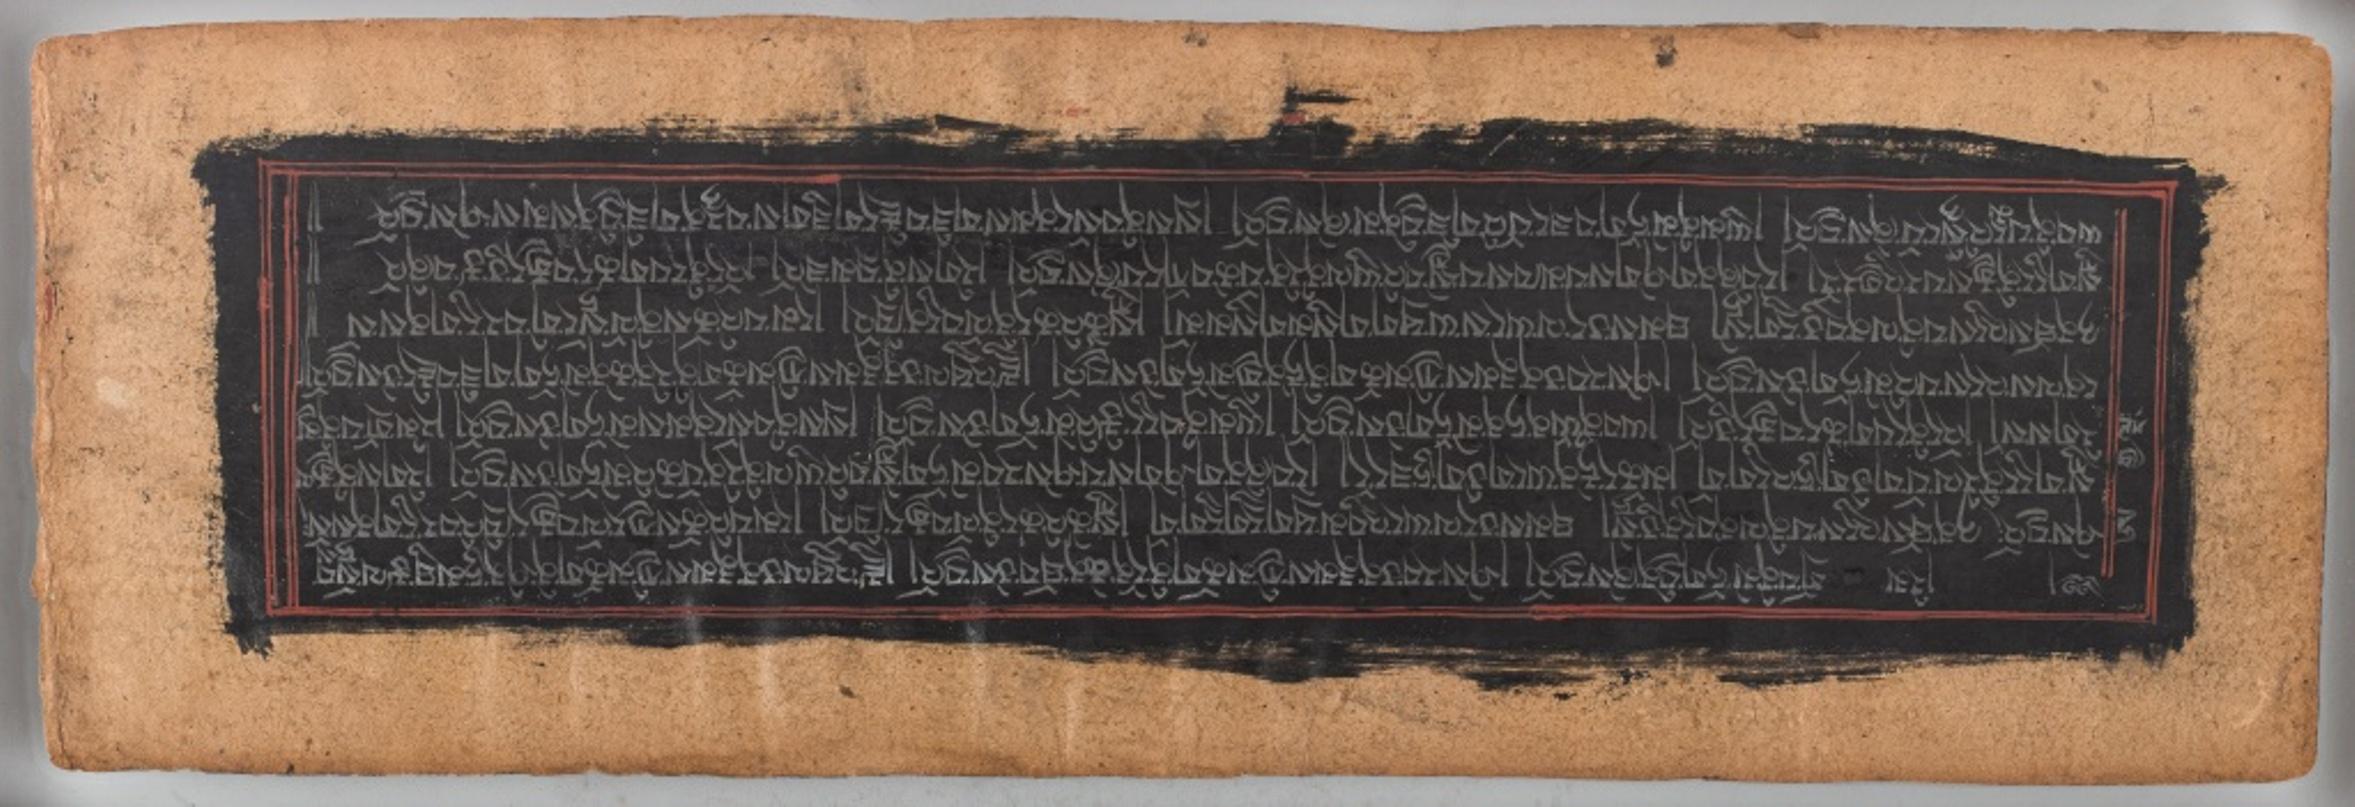 Southeast Asian text on black paint with red border upon tan paper, floating in a modern red lacquered metal frame. Image: 7.5